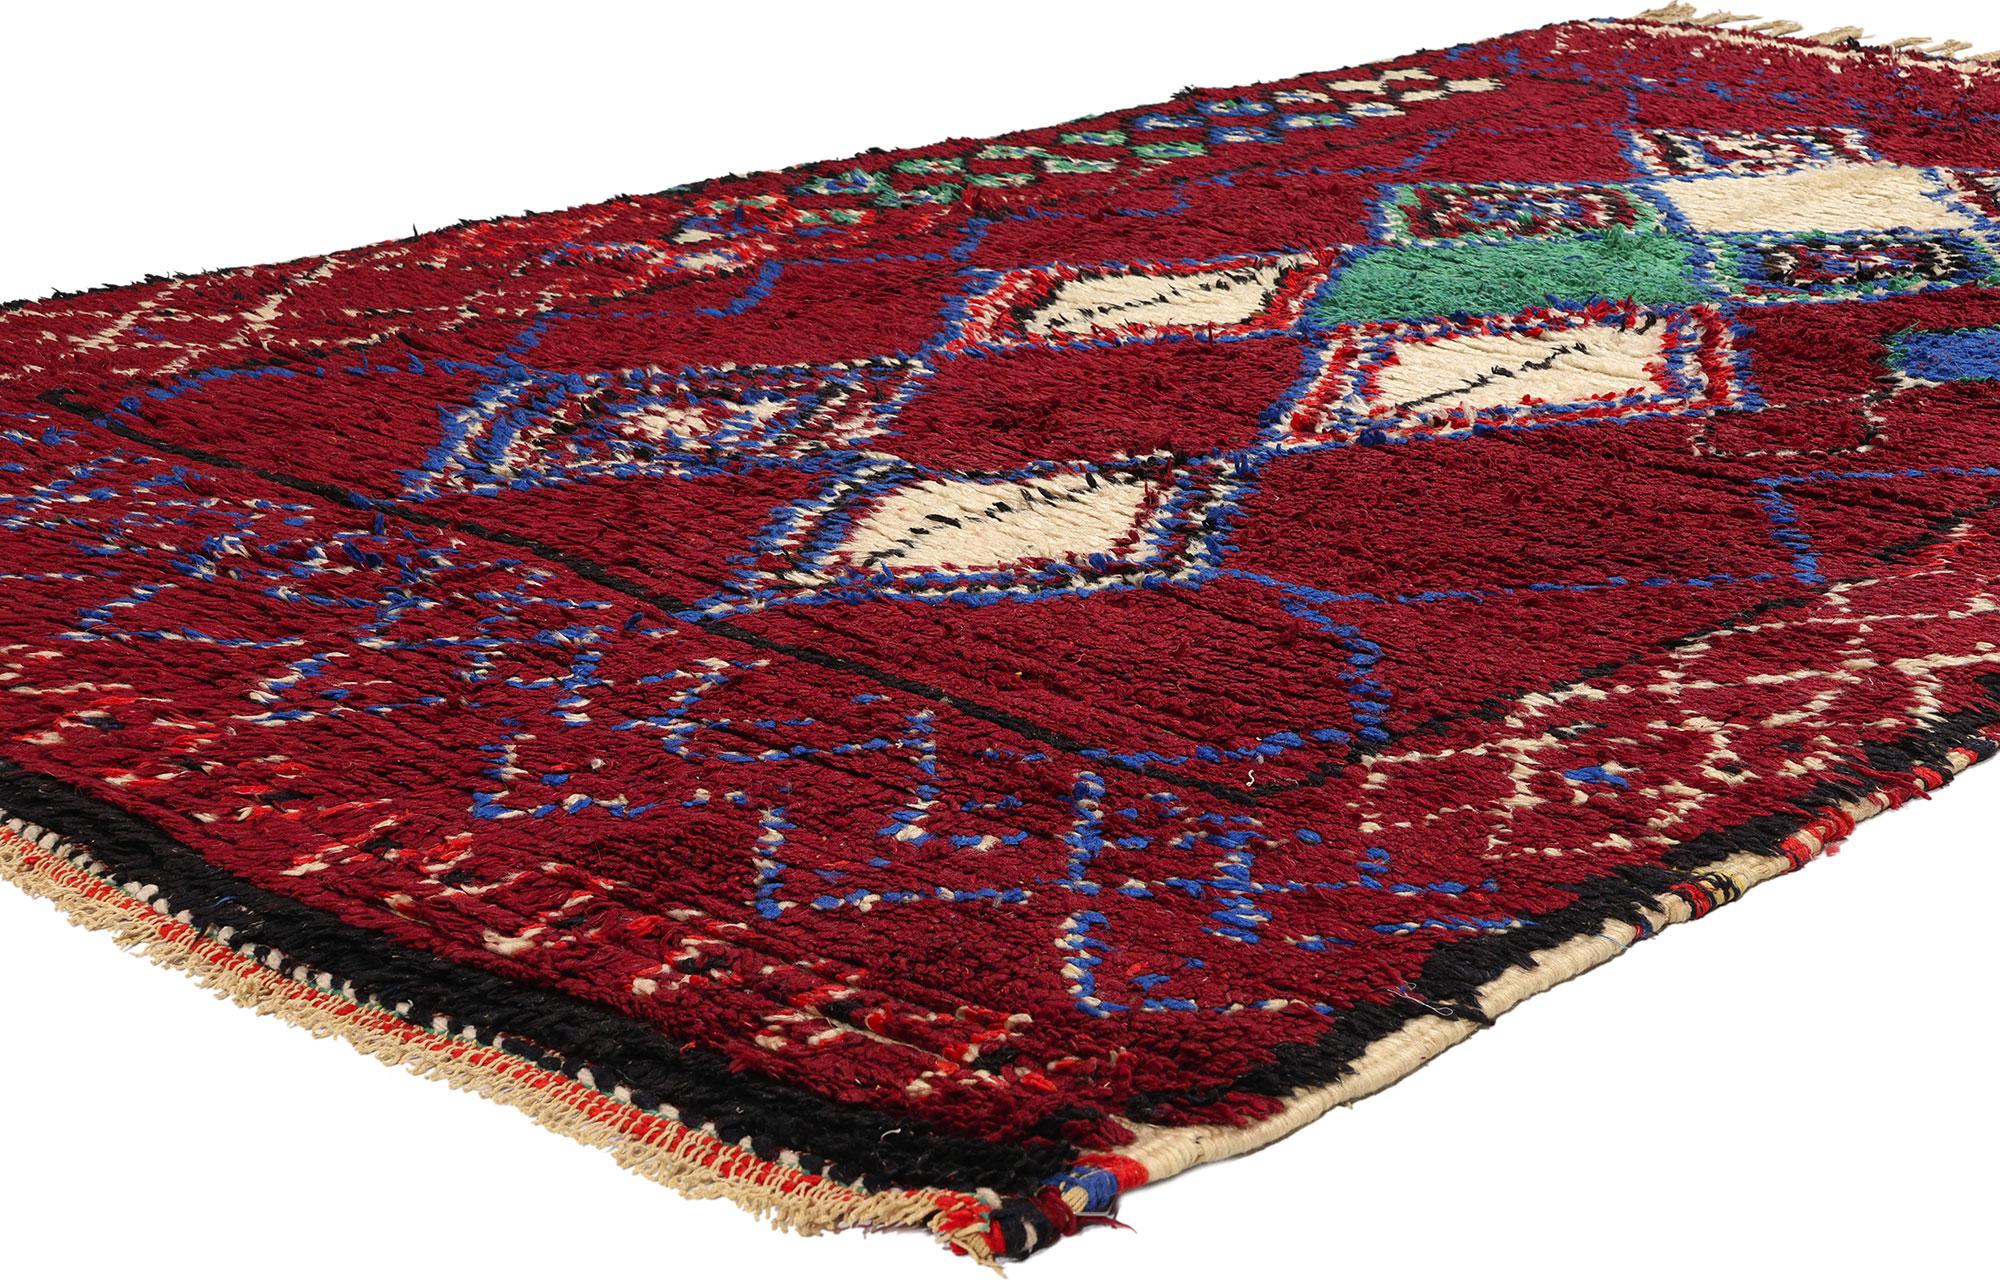 21737 Vintage Red Moroccan Azilal Rug, 05'02 x 08'10. Red Moroccan Azilal rugs stand as exquisite examples of traditional Moroccan artisanship, meticulously crafted by skilled Berber artisans originating from the Azilal region of Morocco. What